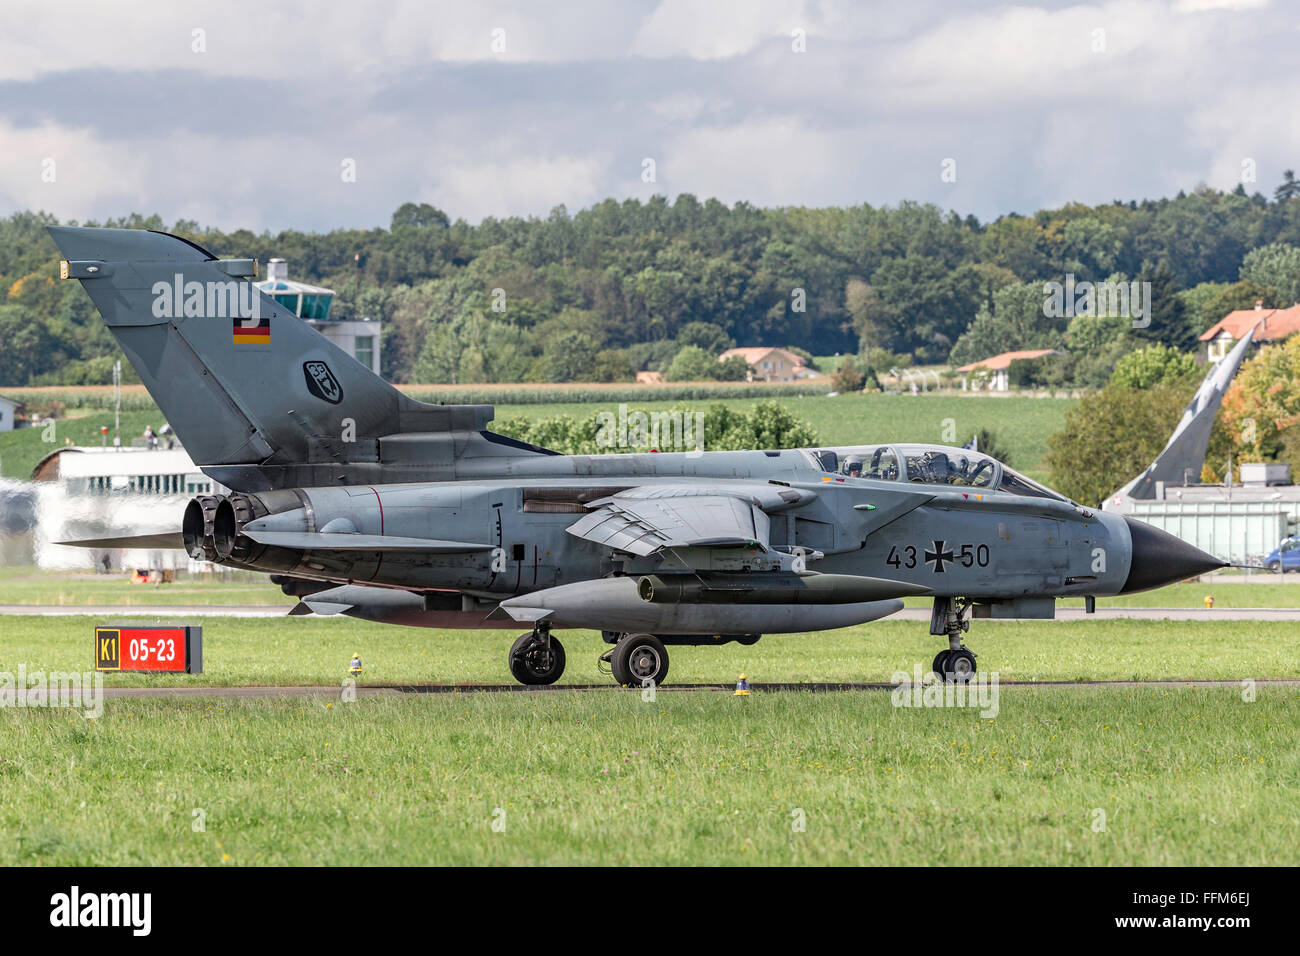 German Air Force (Luftwaffe) Panavia Tornado IDS 43+50 fighter aircraft  departing Payerne Air Base in Switzerland Stock Photo - Alamy